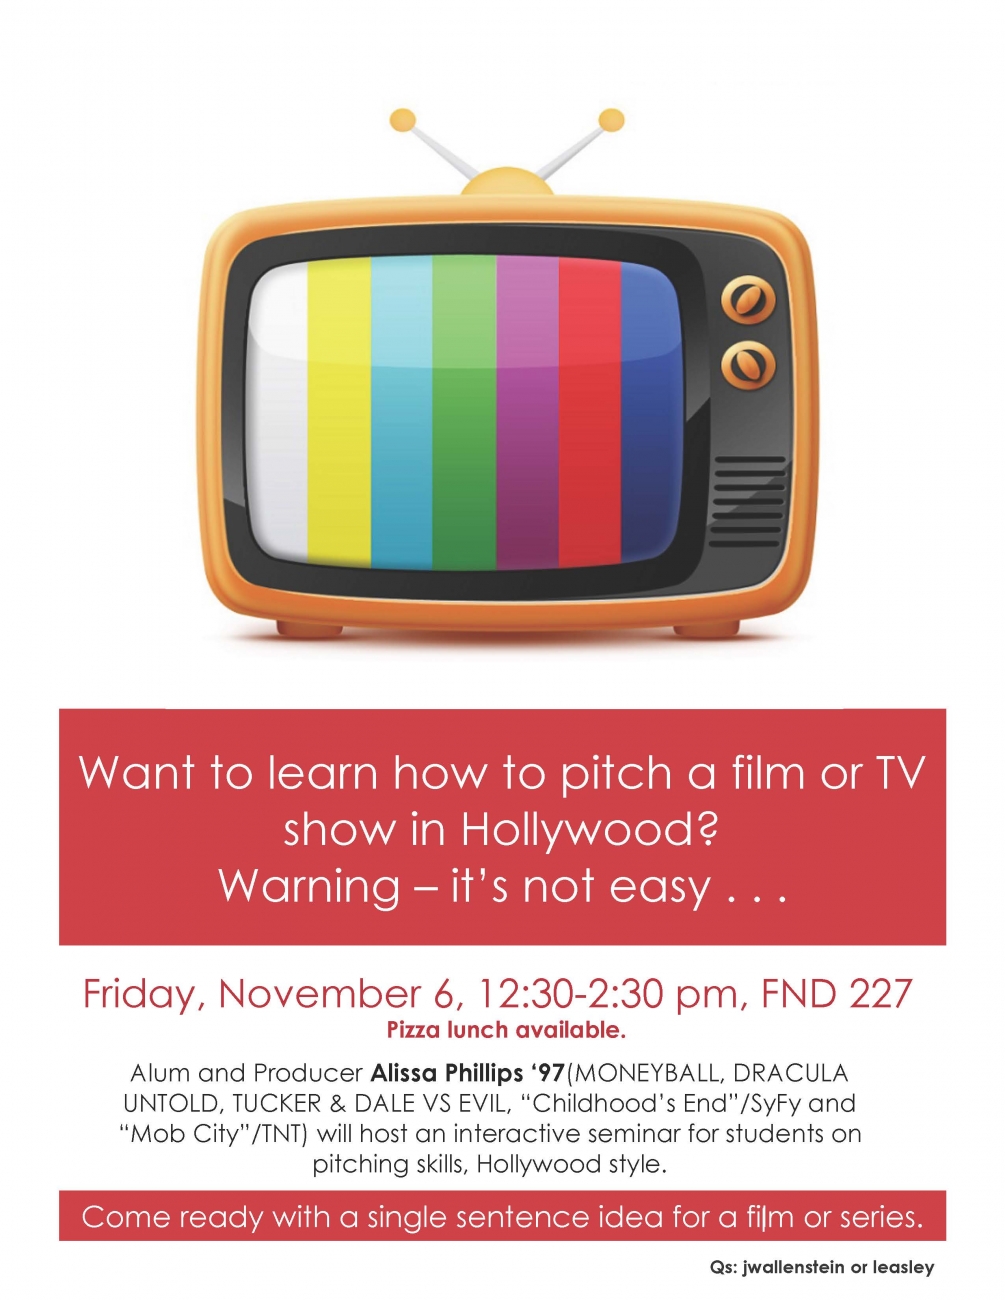 "Want to learn how to pitch a film or TV show in Hollywood?" lecture by Alissa phillips